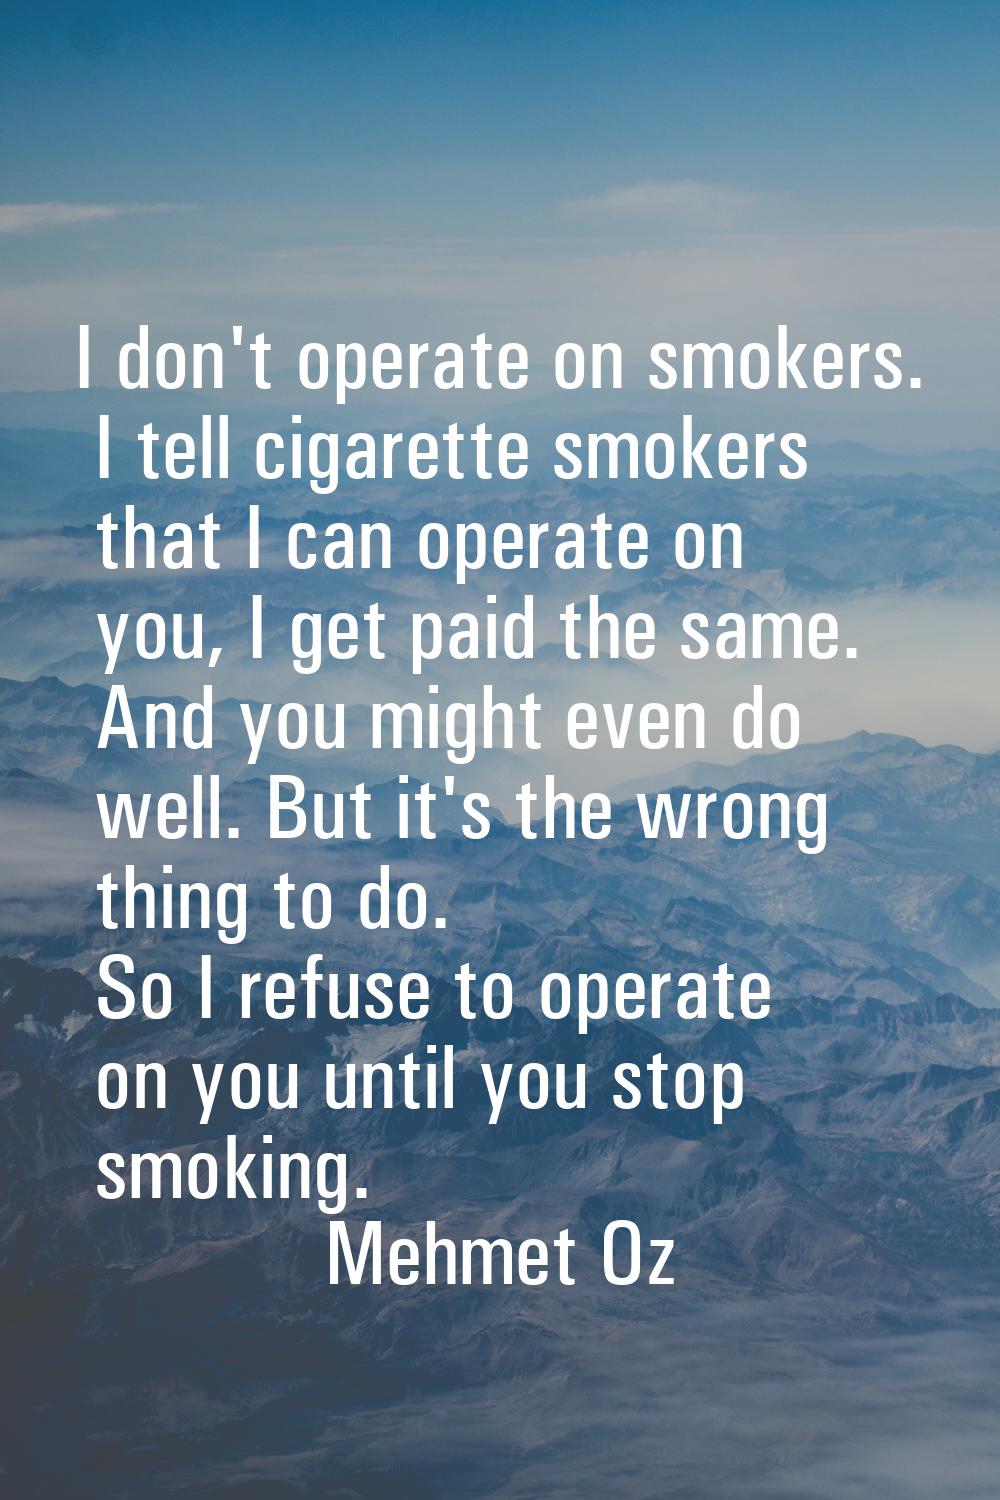 I don't operate on smokers. I tell cigarette smokers that I can operate on you, I get paid the same